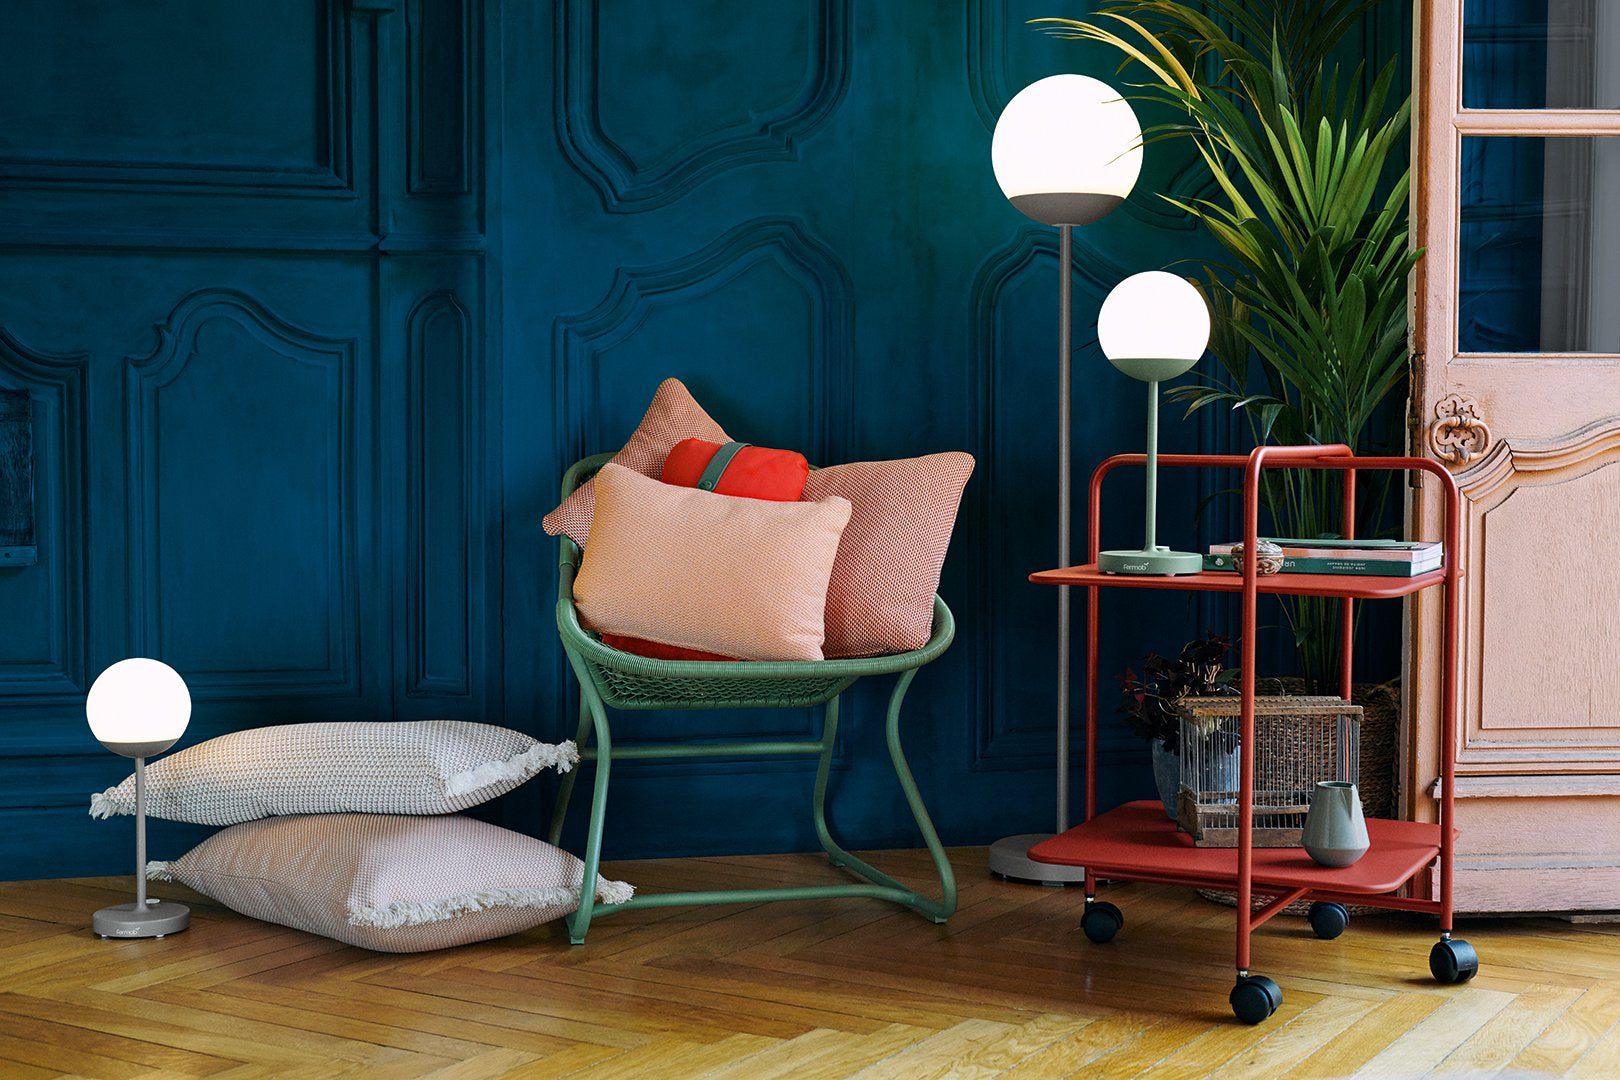 A French company that manufactures high-quality outdoor furniture, lighting, and accessories in beautiful bold colors and durable modern design. 